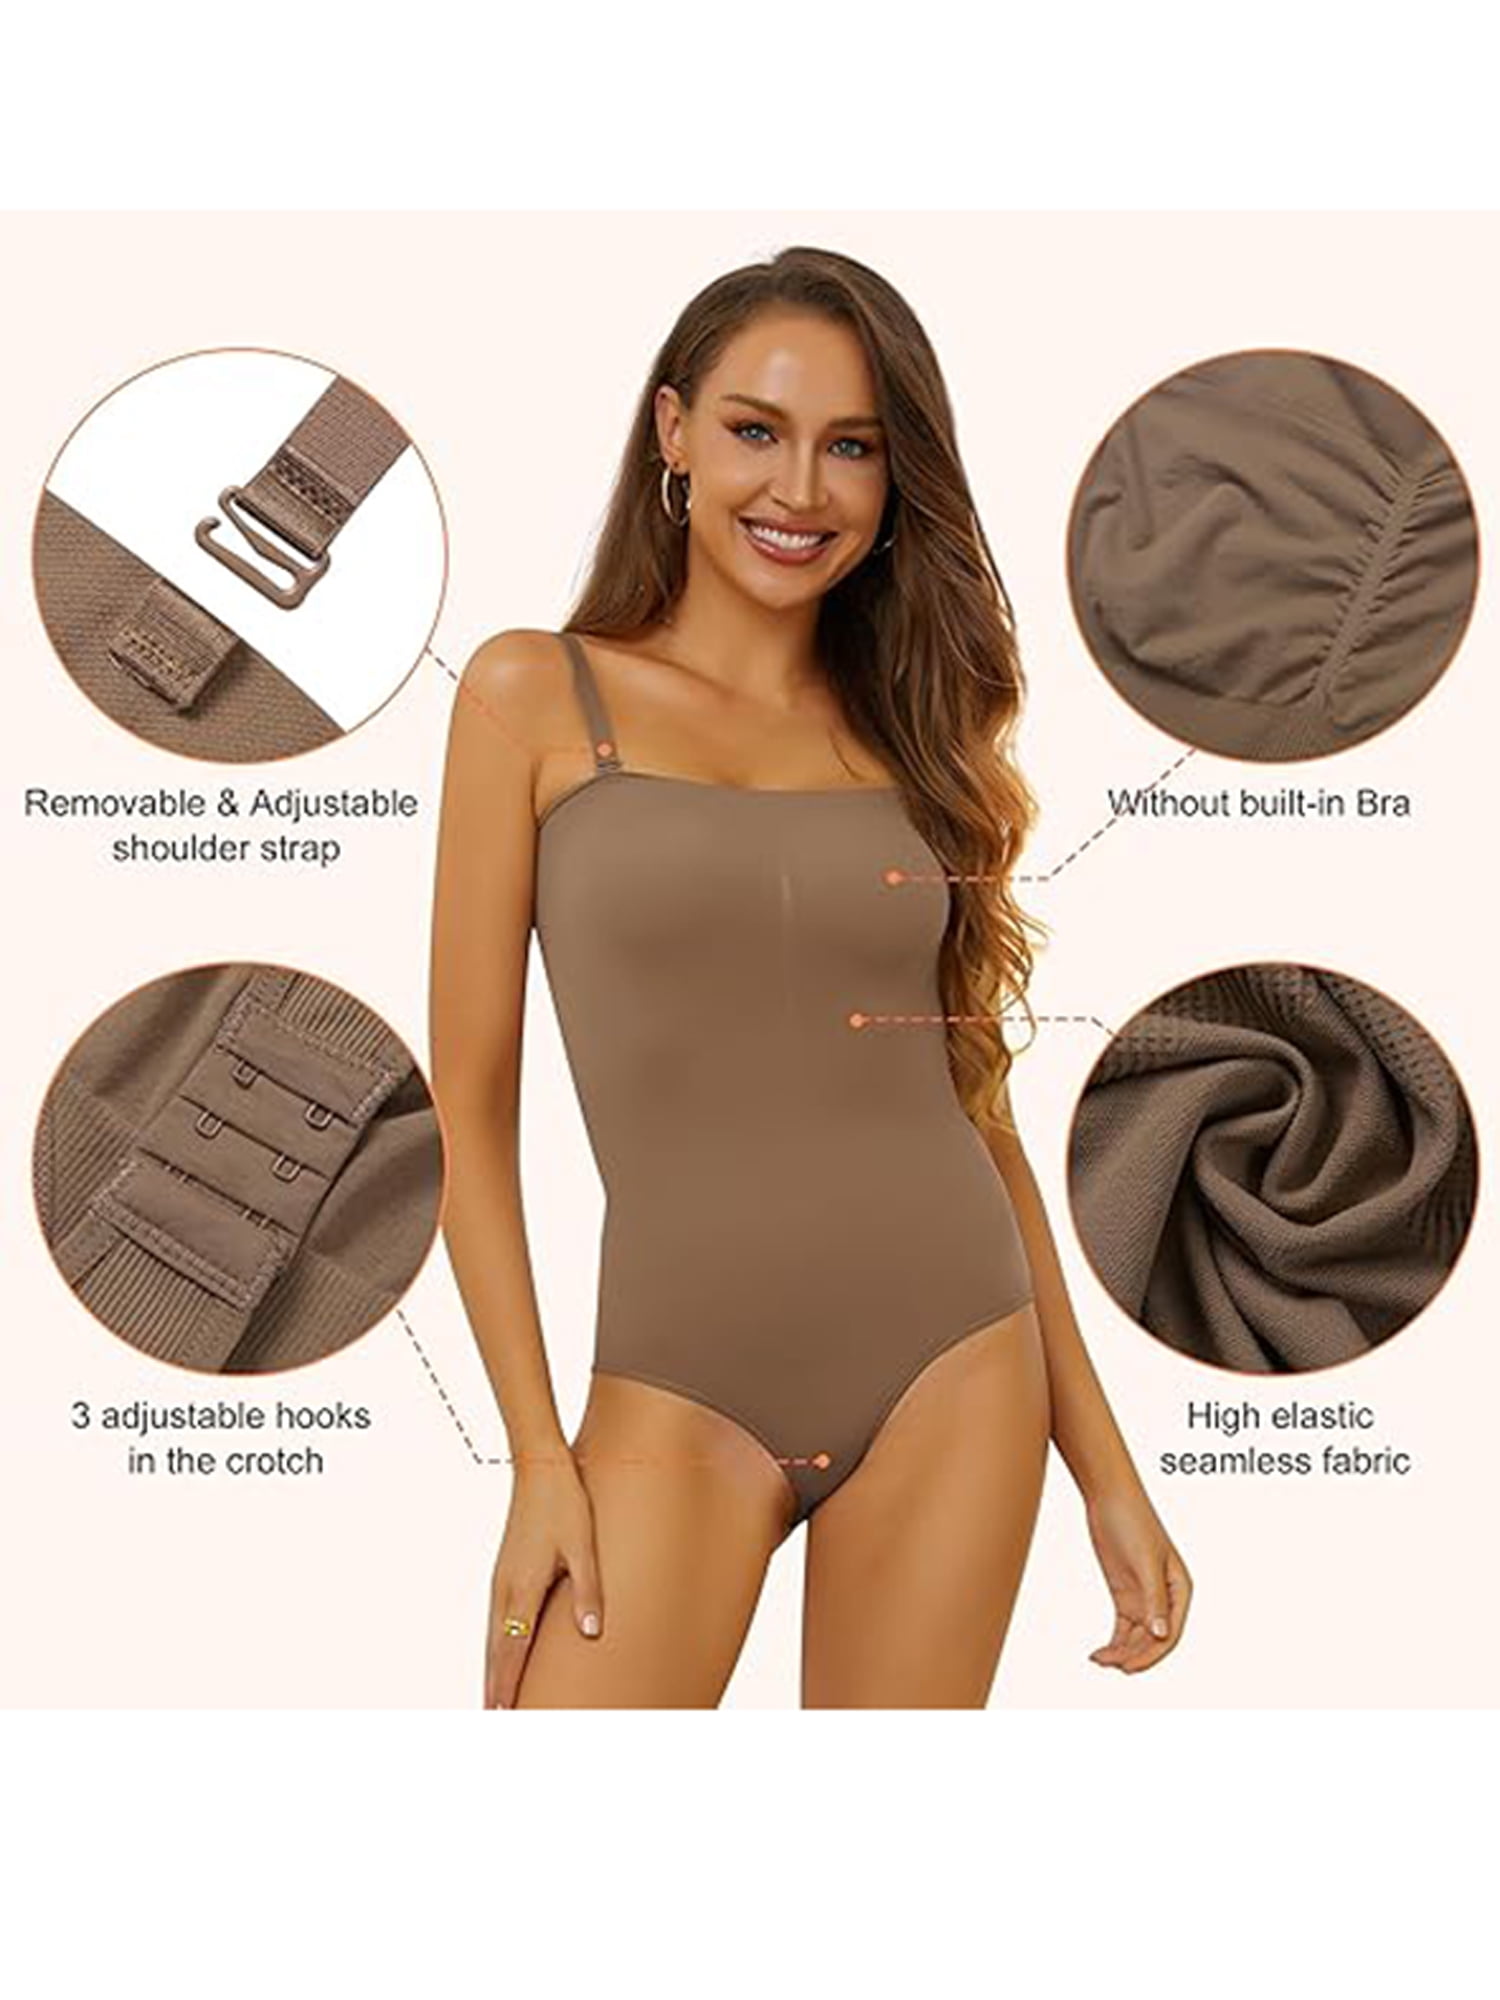 Seamless Womens Tight Fitting Tc Strapless Shaper Bodysuit For Abdominal  Control, Hip Lifting, Body Shaping, And Weight Loss Invisible Thong  Underwear Style #230425 From Cong00, $16.79